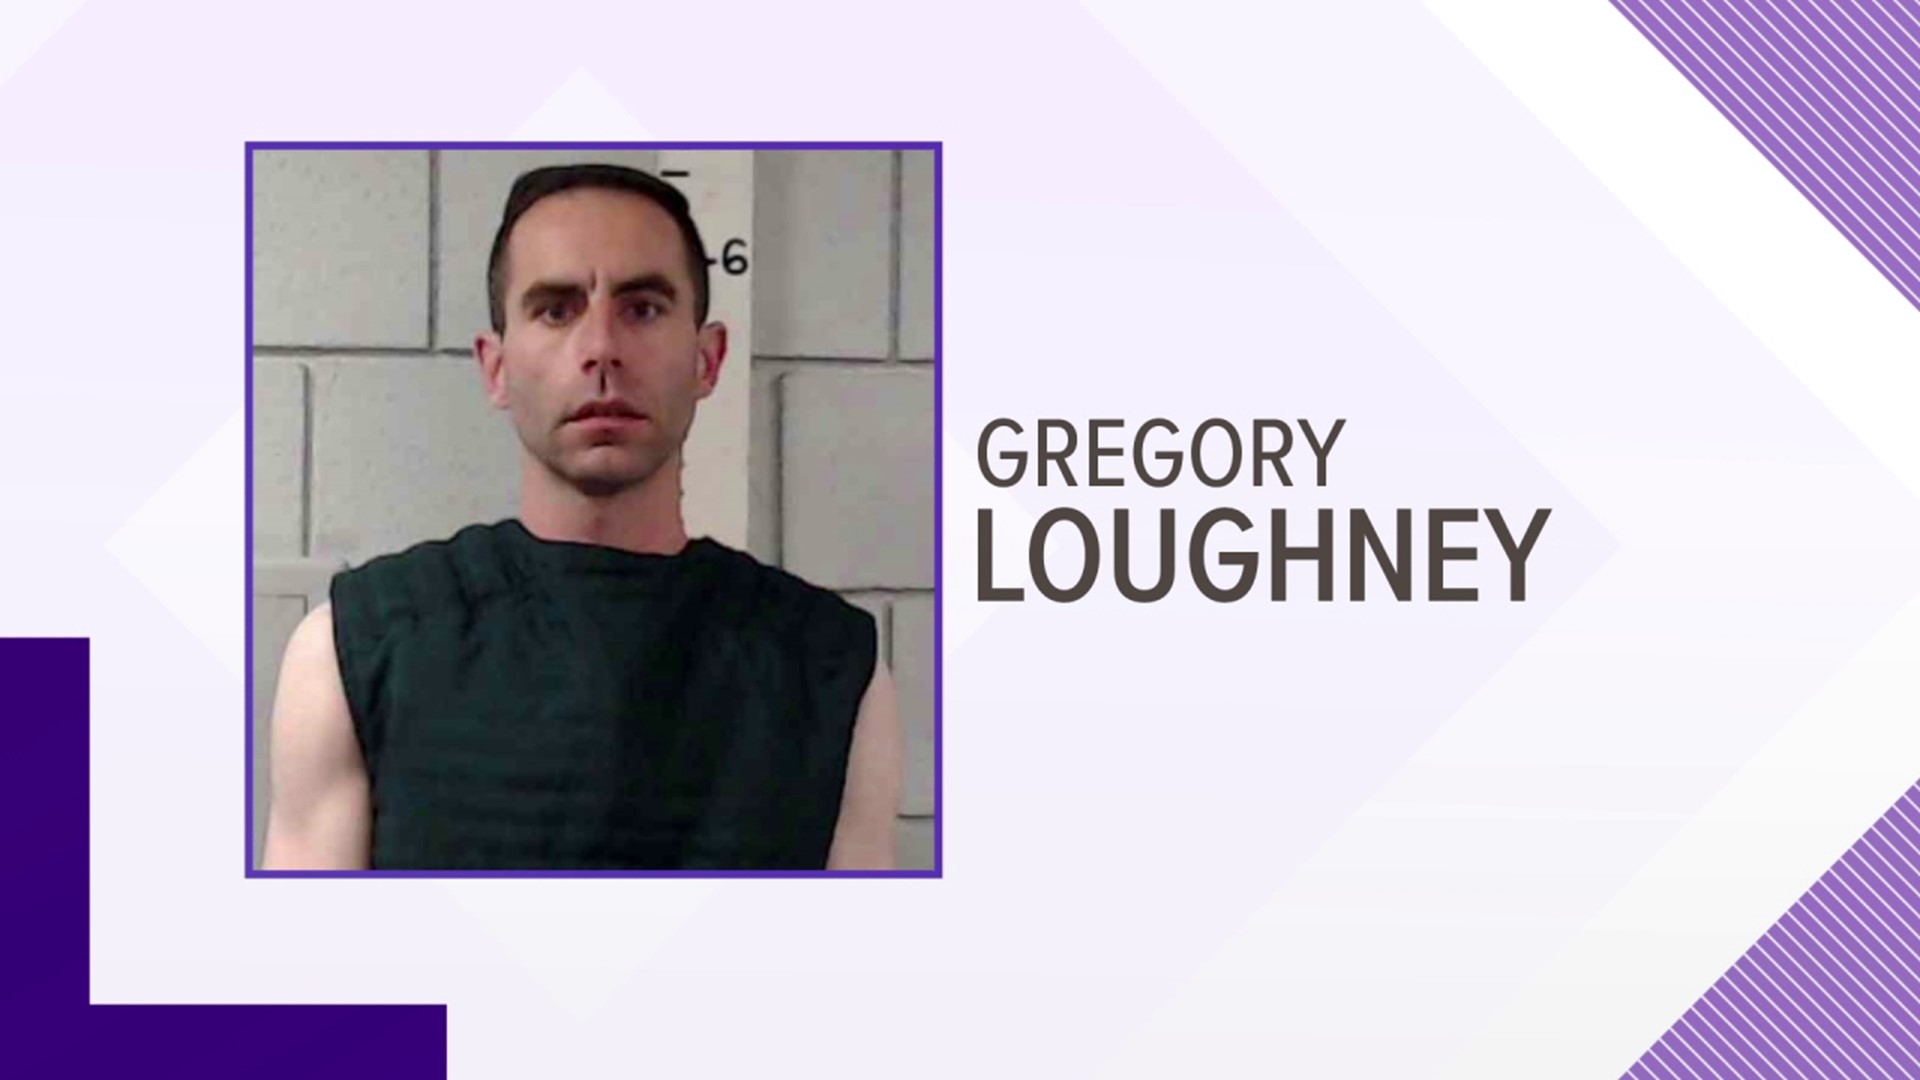 Fr. Gregory Loughney pleaded no contest to attempted indecent assault and attempted corruption of minors back in July.